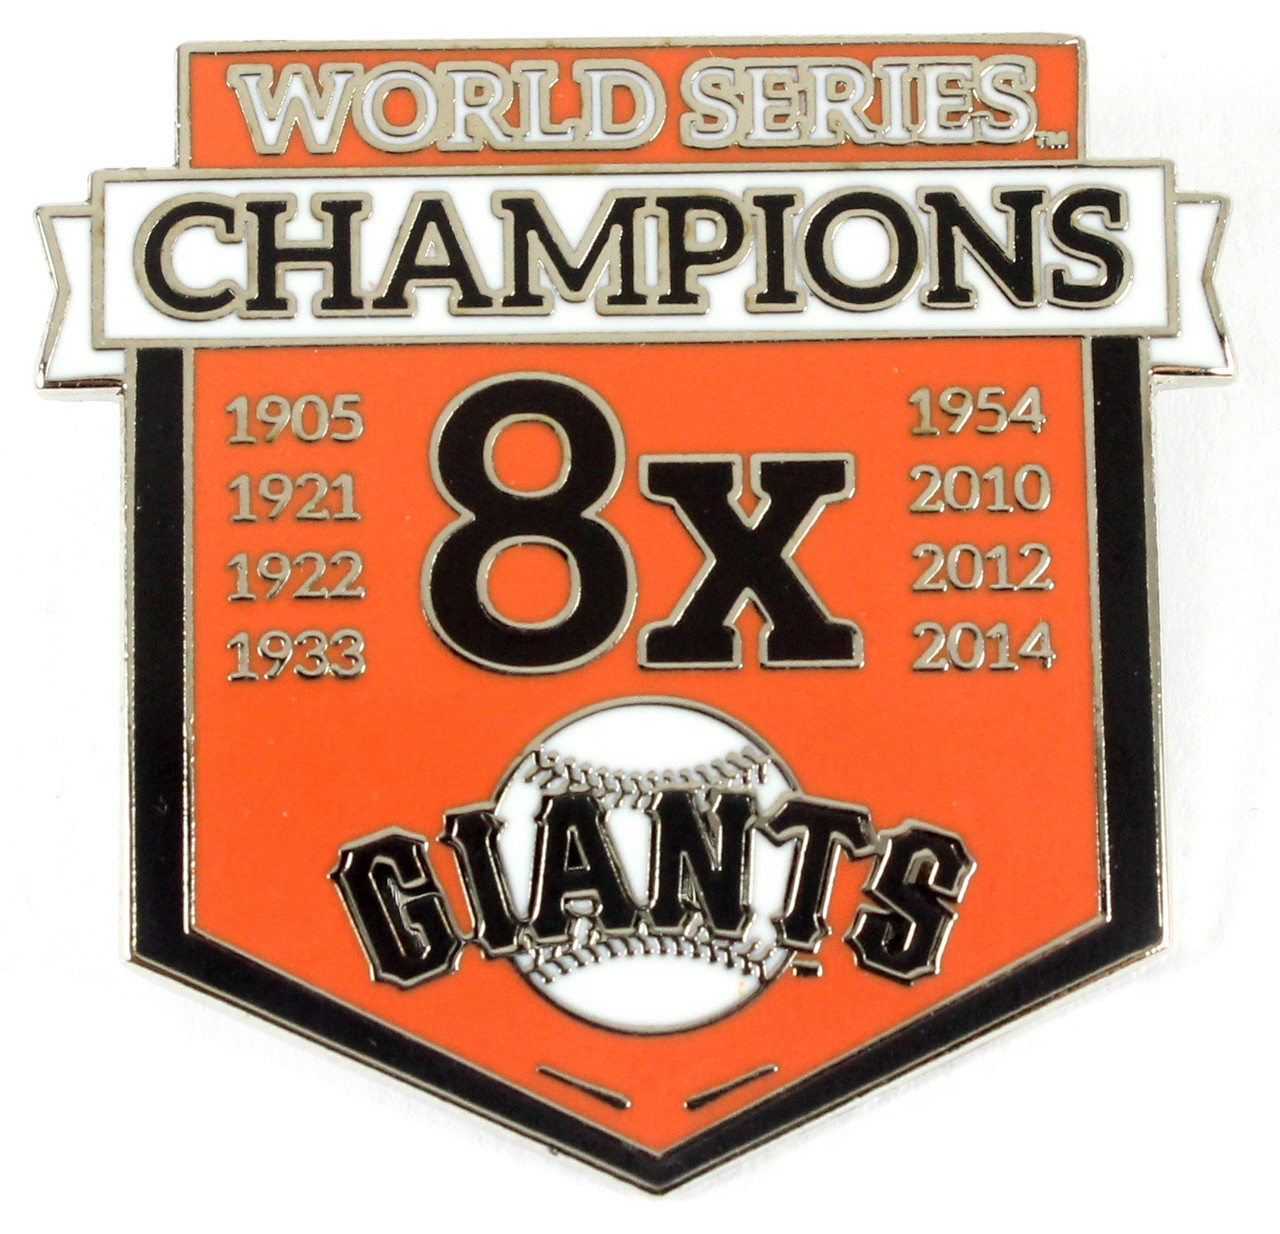 San Francisco Giants 8 -Time World Series Champions Pin - Limited